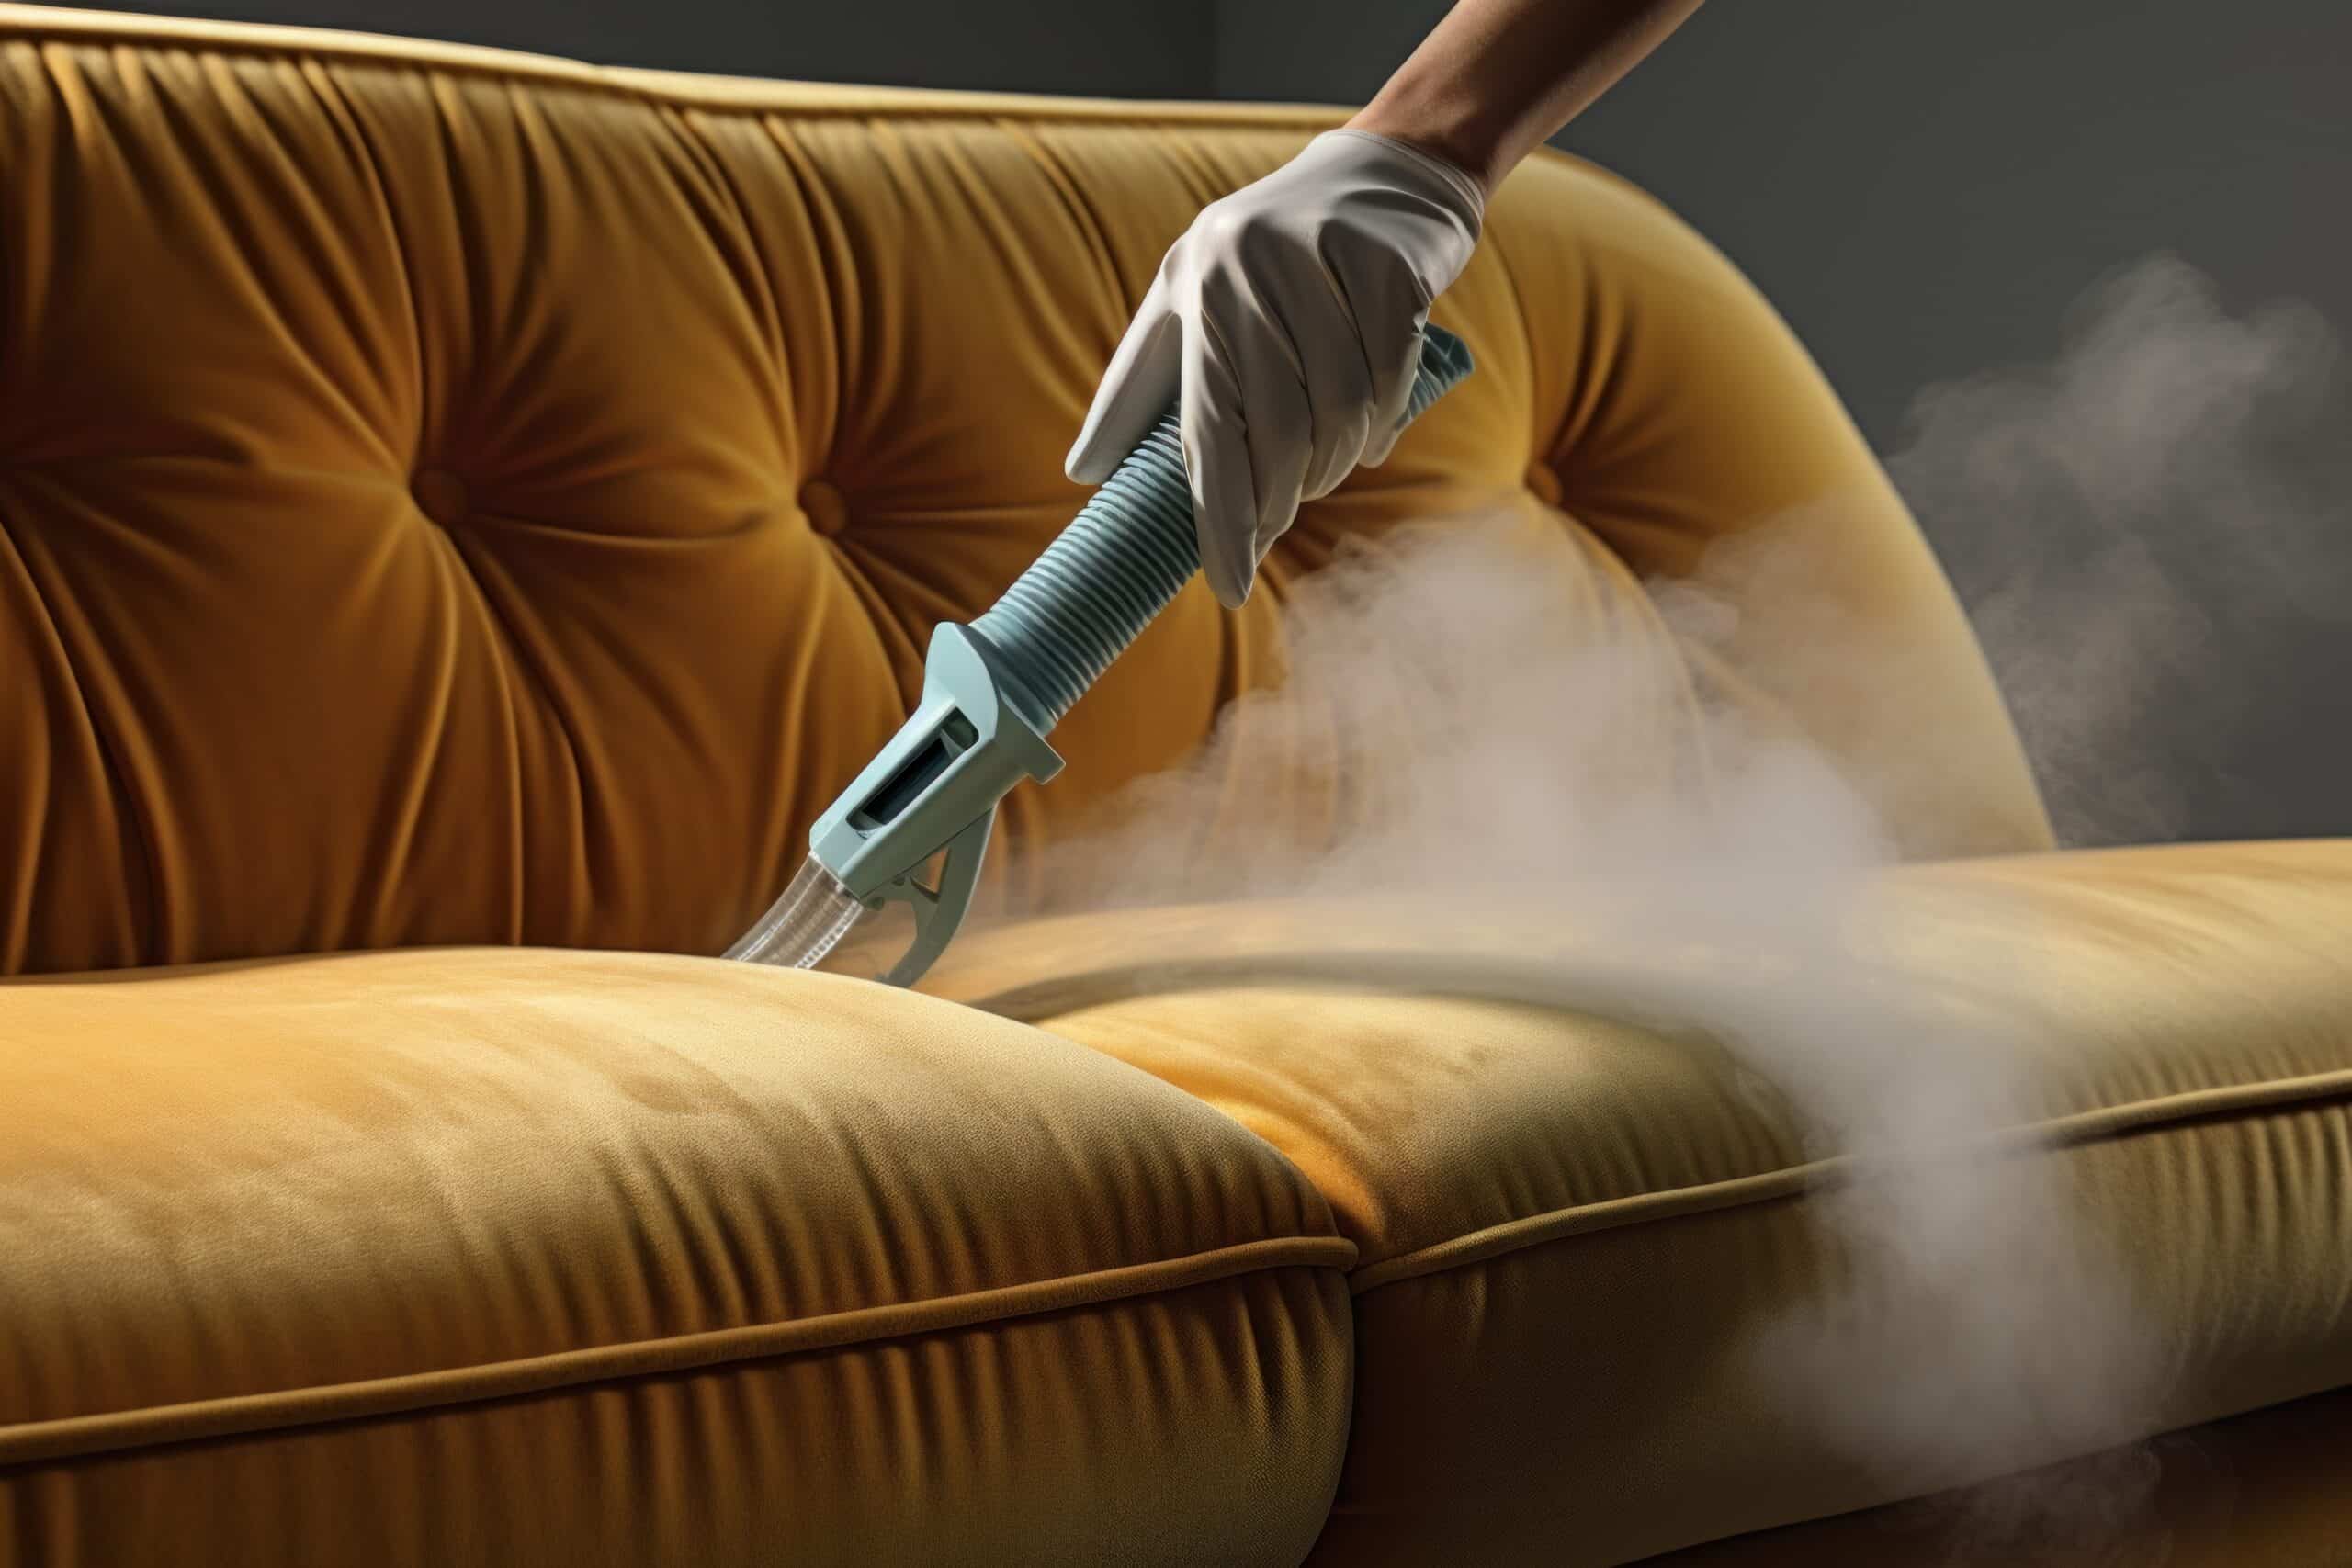 www.appr.com : Can steam cleaning help with allergies and asthma by removing allergens from upholstery and carpet?